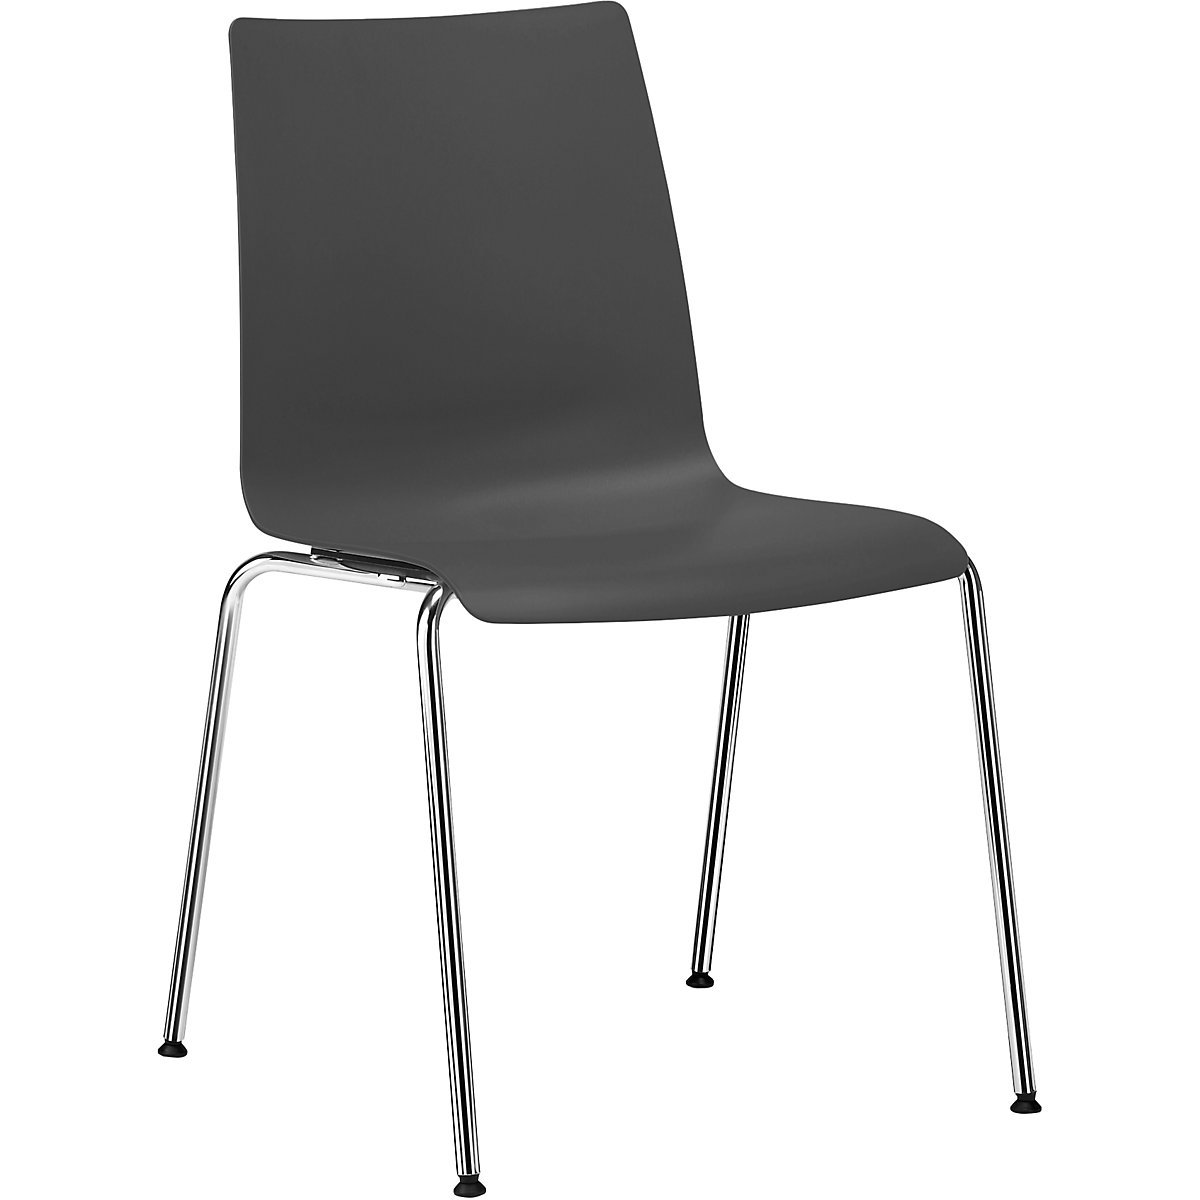 interstuhl – SNIKE contoured plastic chair, one piece seat made of PP, charcoal